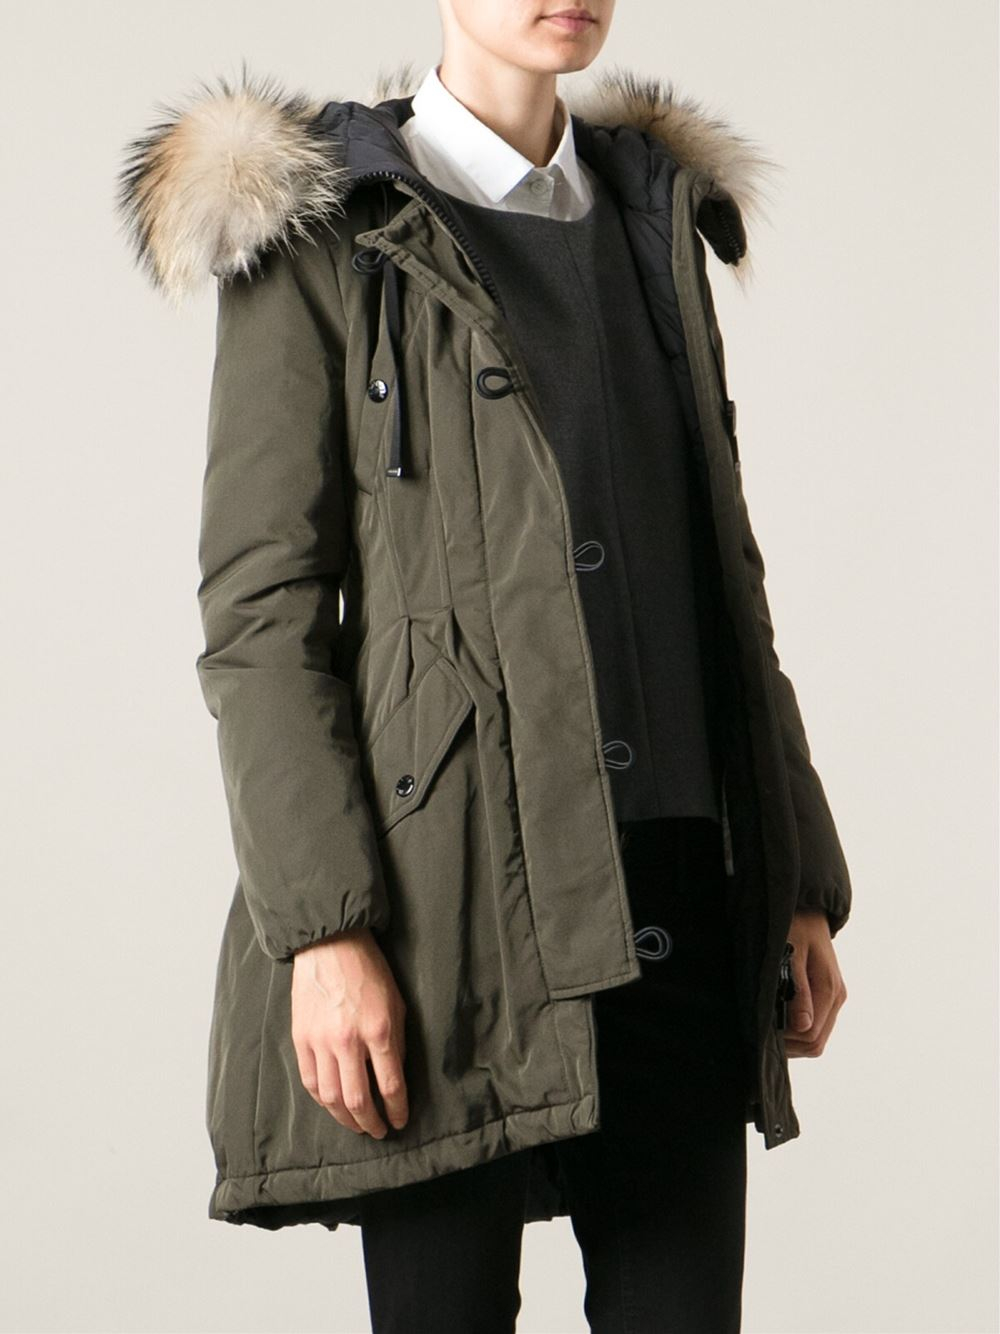 Lyst - Moncler Arrious Parka in Green